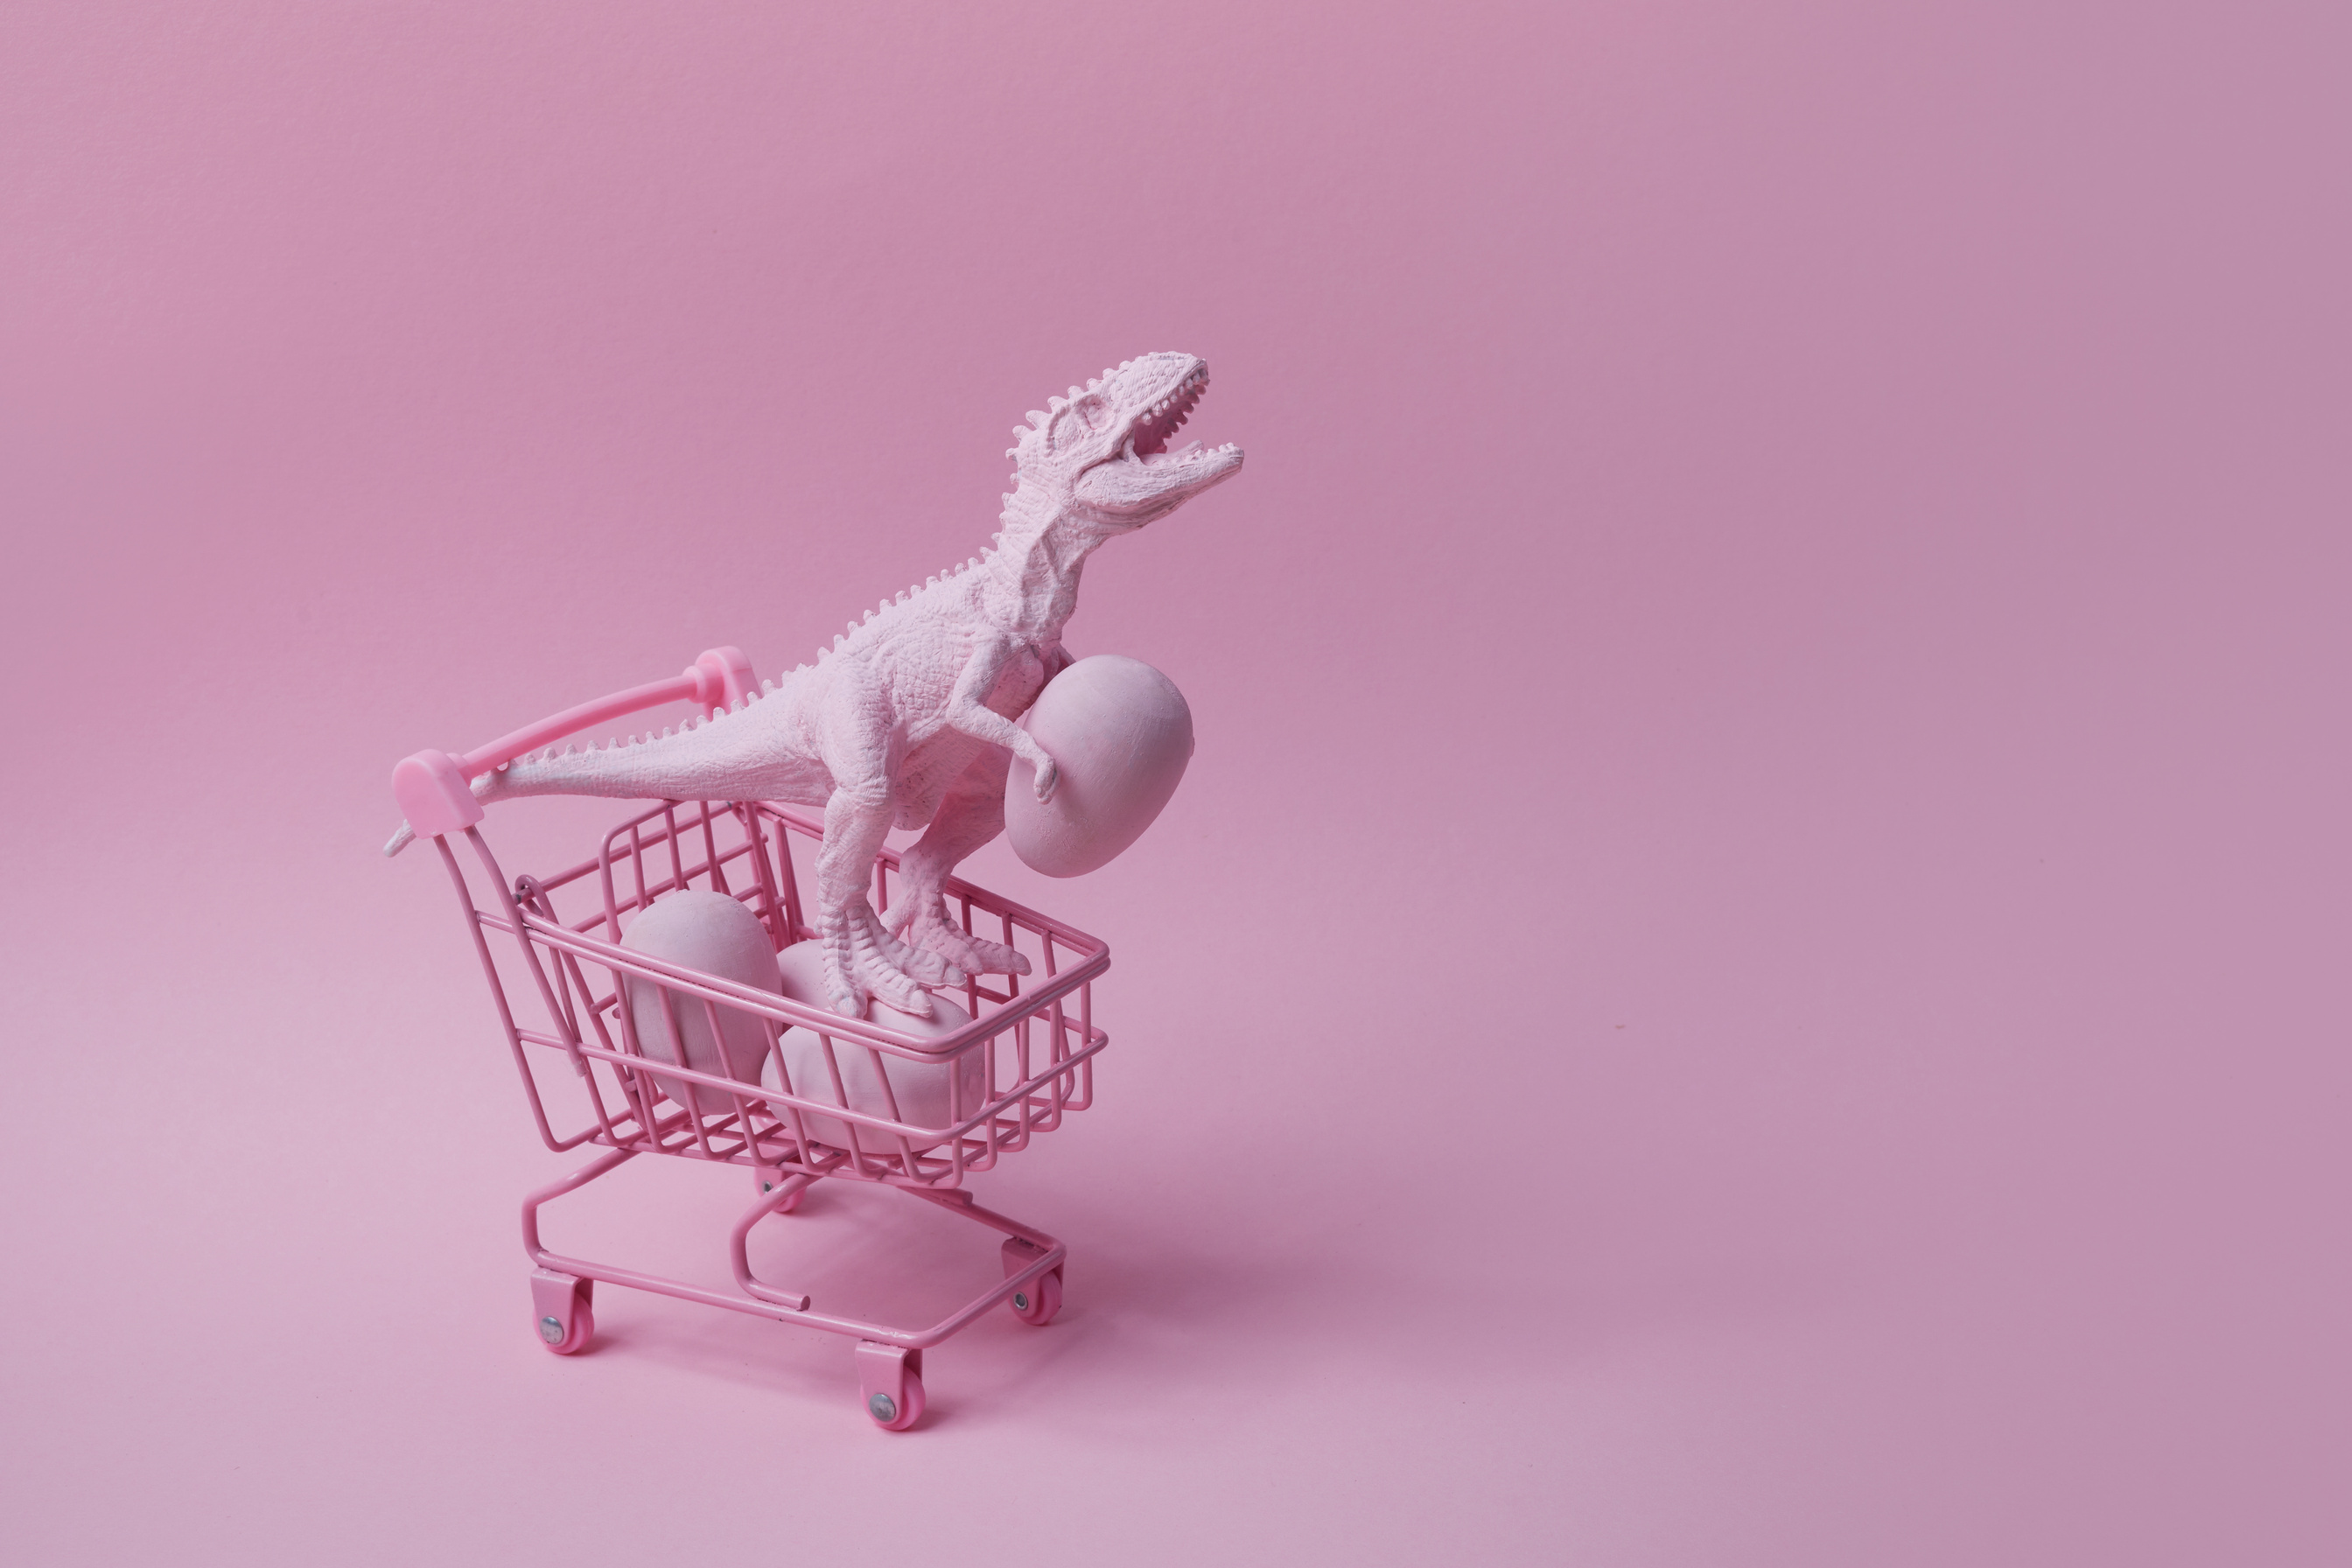 Pink T Rex Dinosaur with Eggs in a Shopping Cart